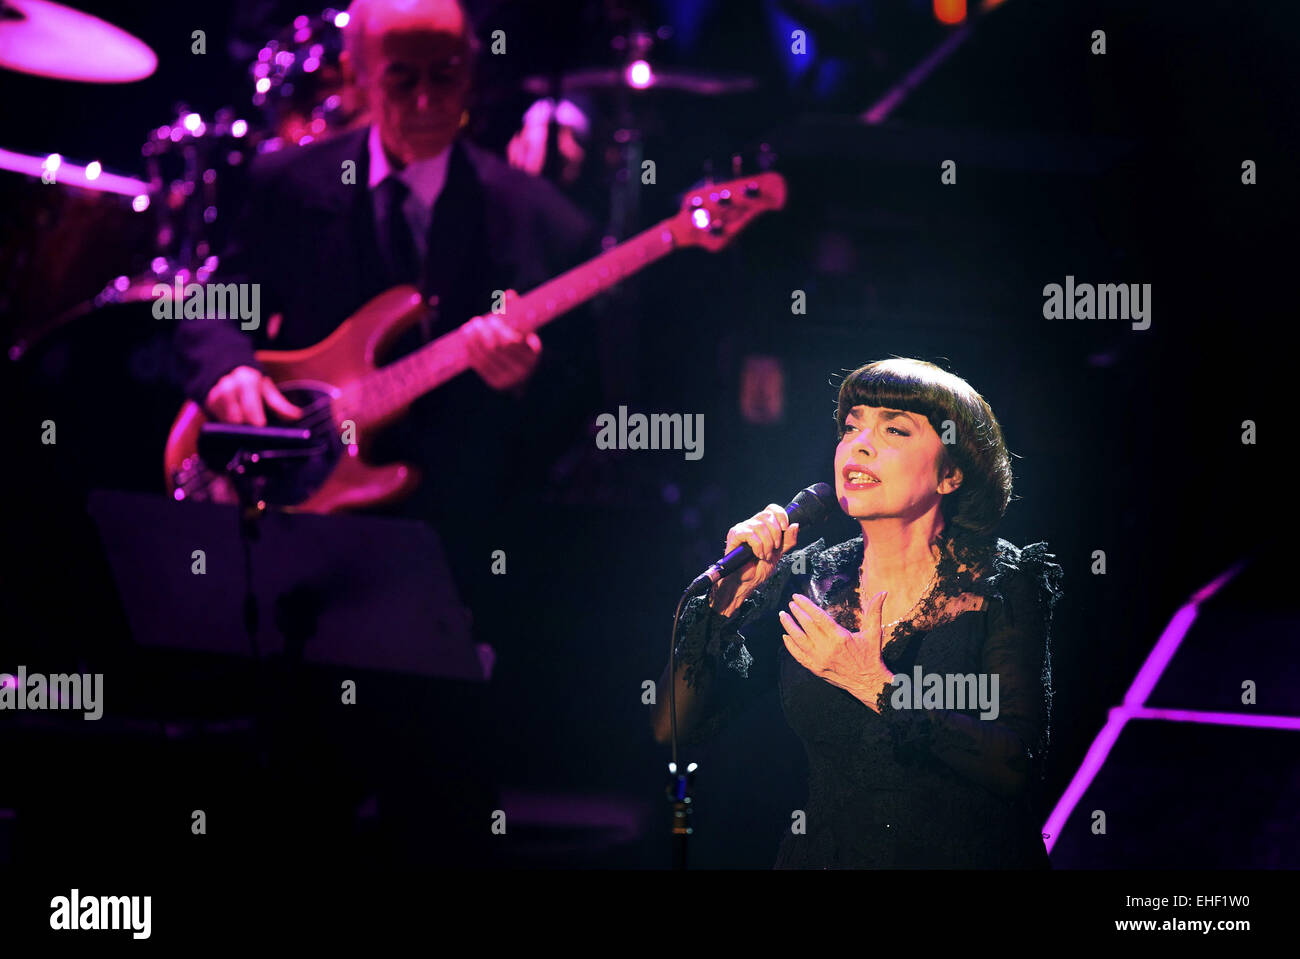 Fuessen, Germany. 12th Mar, 2015. French singer Mireille Mathieu performs on stage as part of her tour celebrating her 50th stage anniversary at the Festspielhaus concert venue in Fuessen, Germany, 12 March 2015. Photo: Karl-Josef Hildenbrand /dpa/Alamy Live News Stock Photo